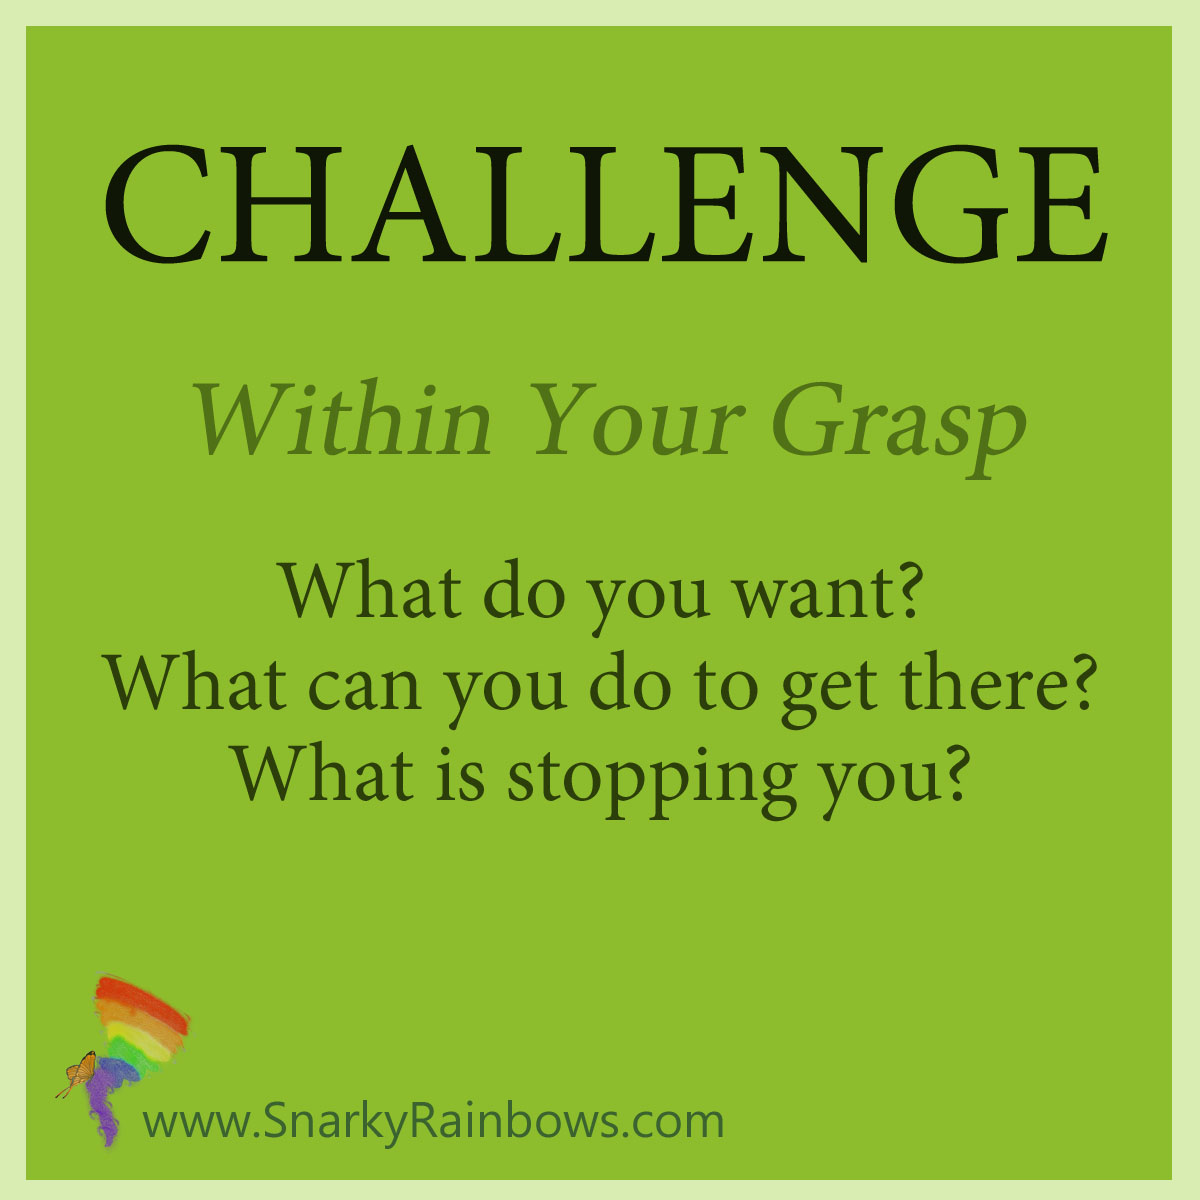 Challenge - November 1 - within your grasp